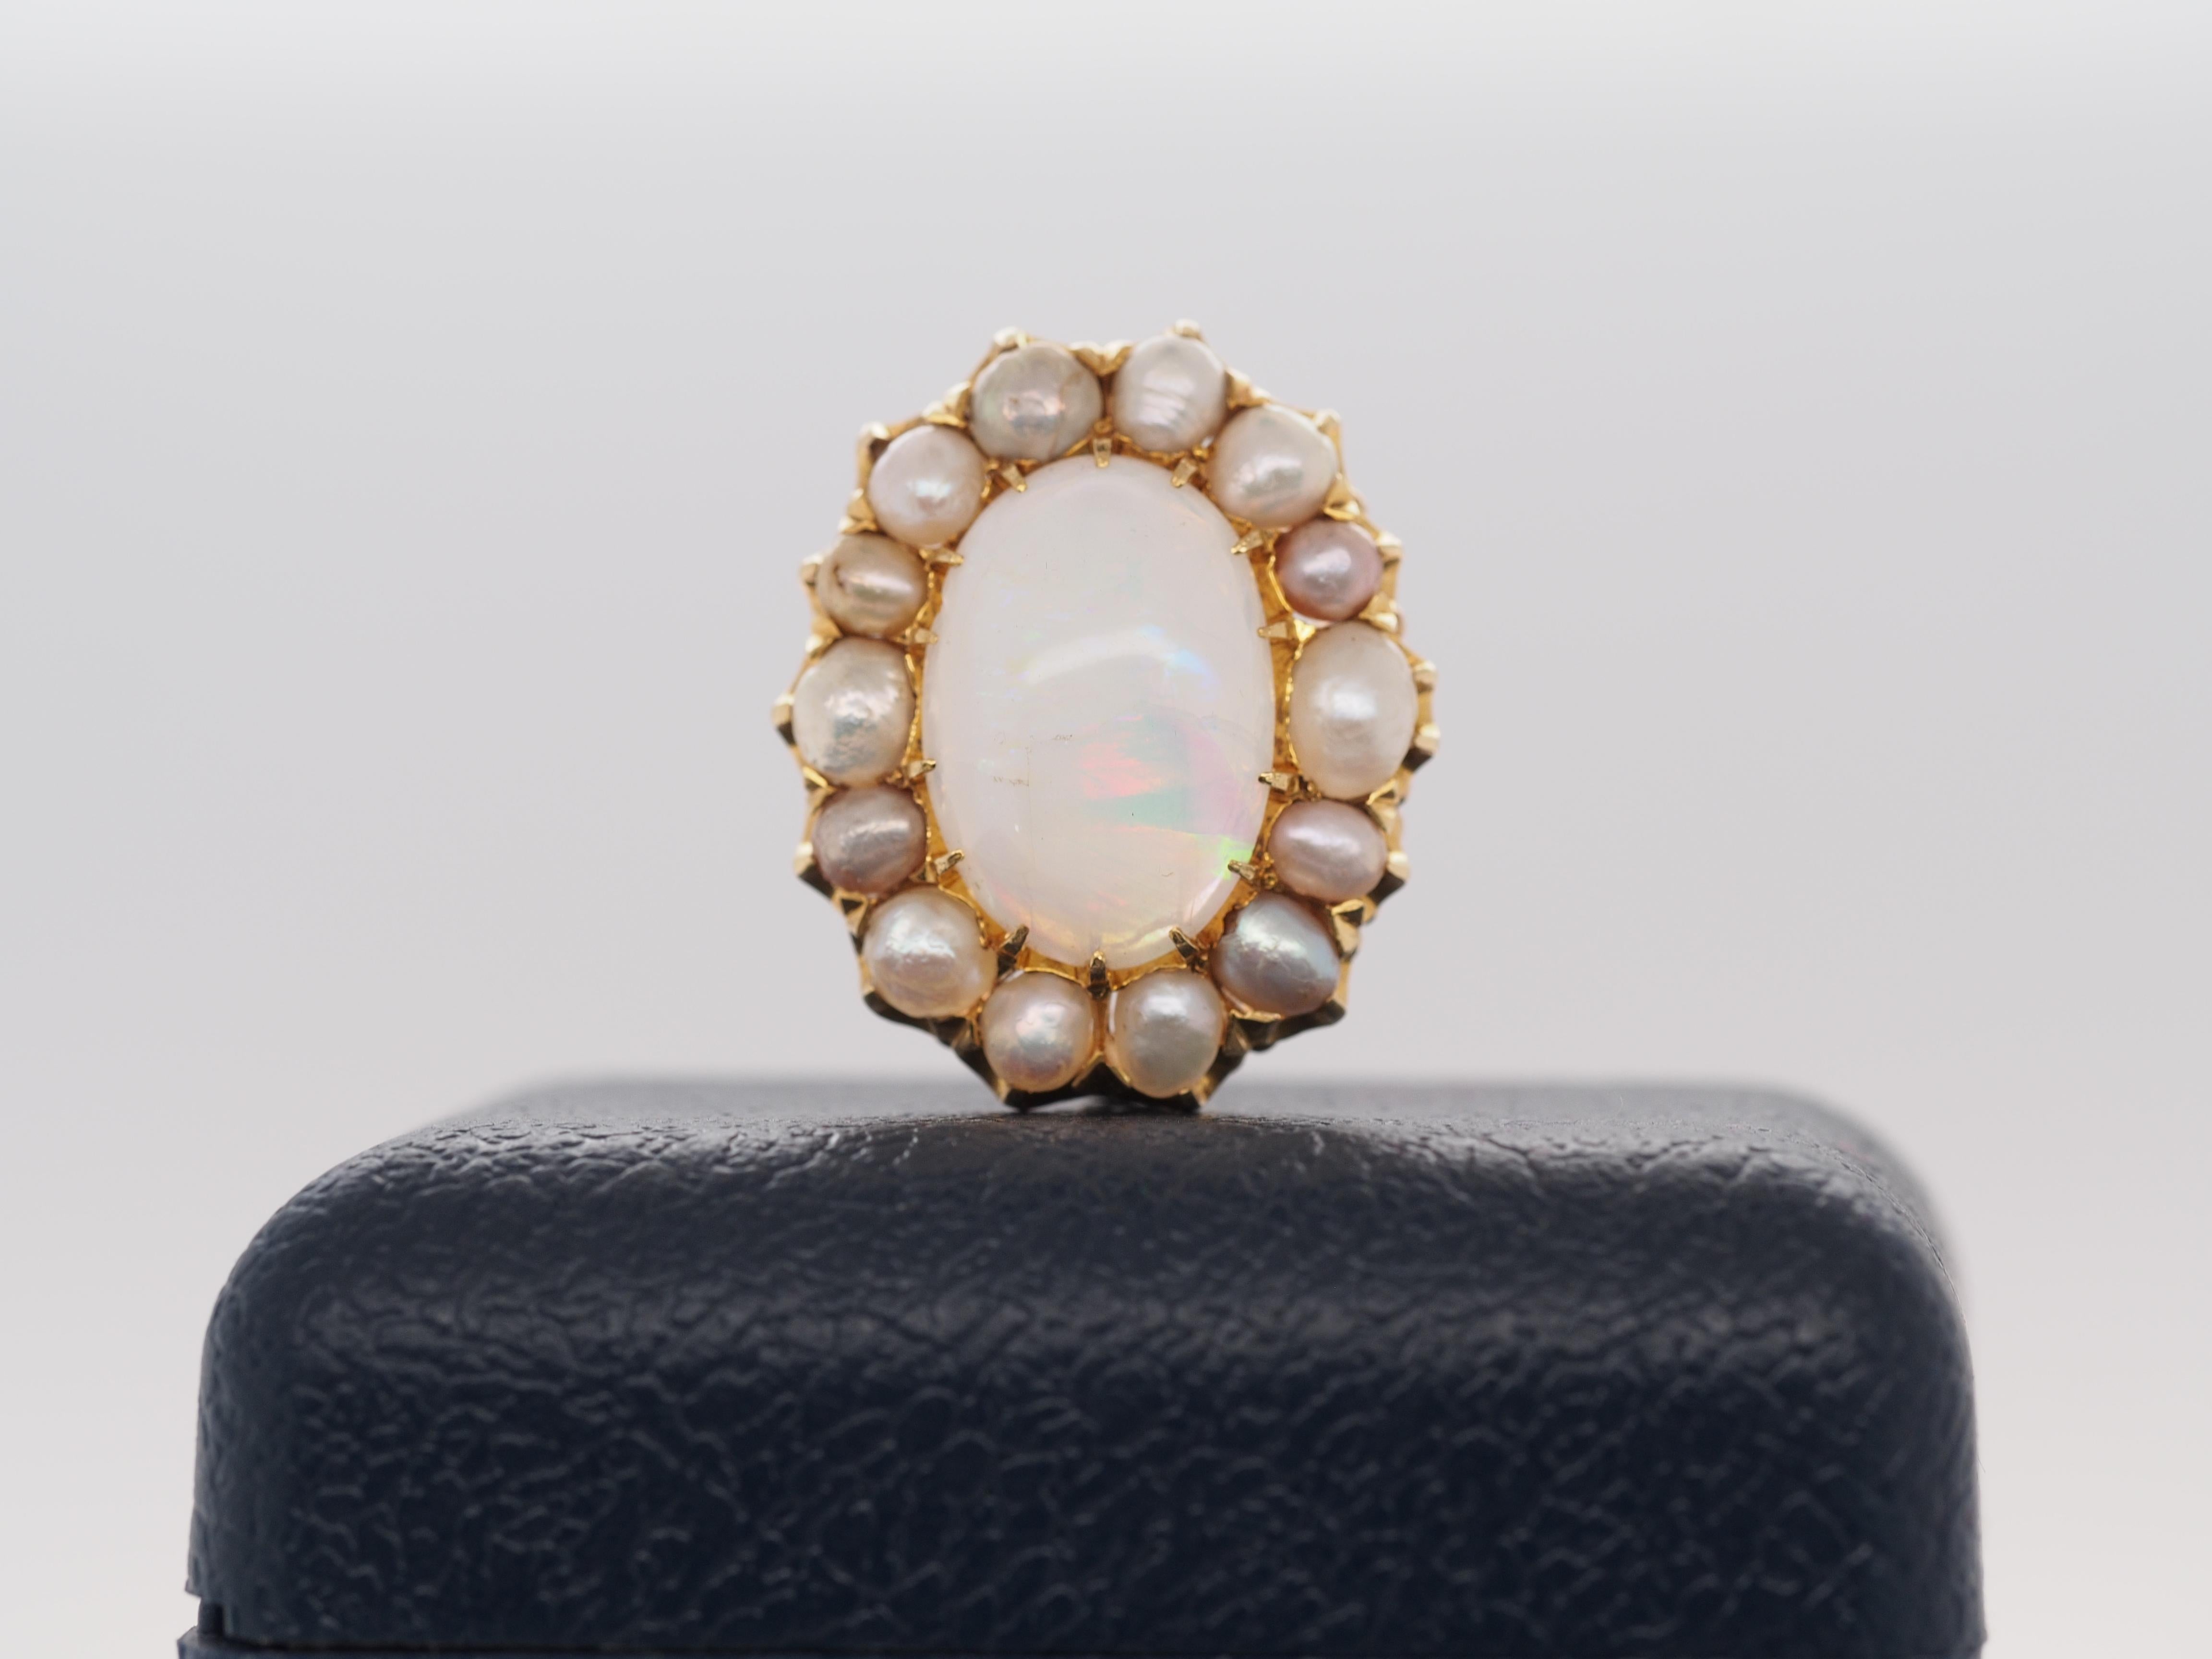 Item Details:
Metal Type: 20K Yellow Gold [Hallmarked, and Tested]
Weight: 7.5 grams
Center Opal Details:
Measurement: 11mm x 17.5mm x
Cut: Oval Cabochon
Color: Orange, Pink, Red, Green
Side Pearl Details:
Type: Natural, Saltwater pearls
Weight: